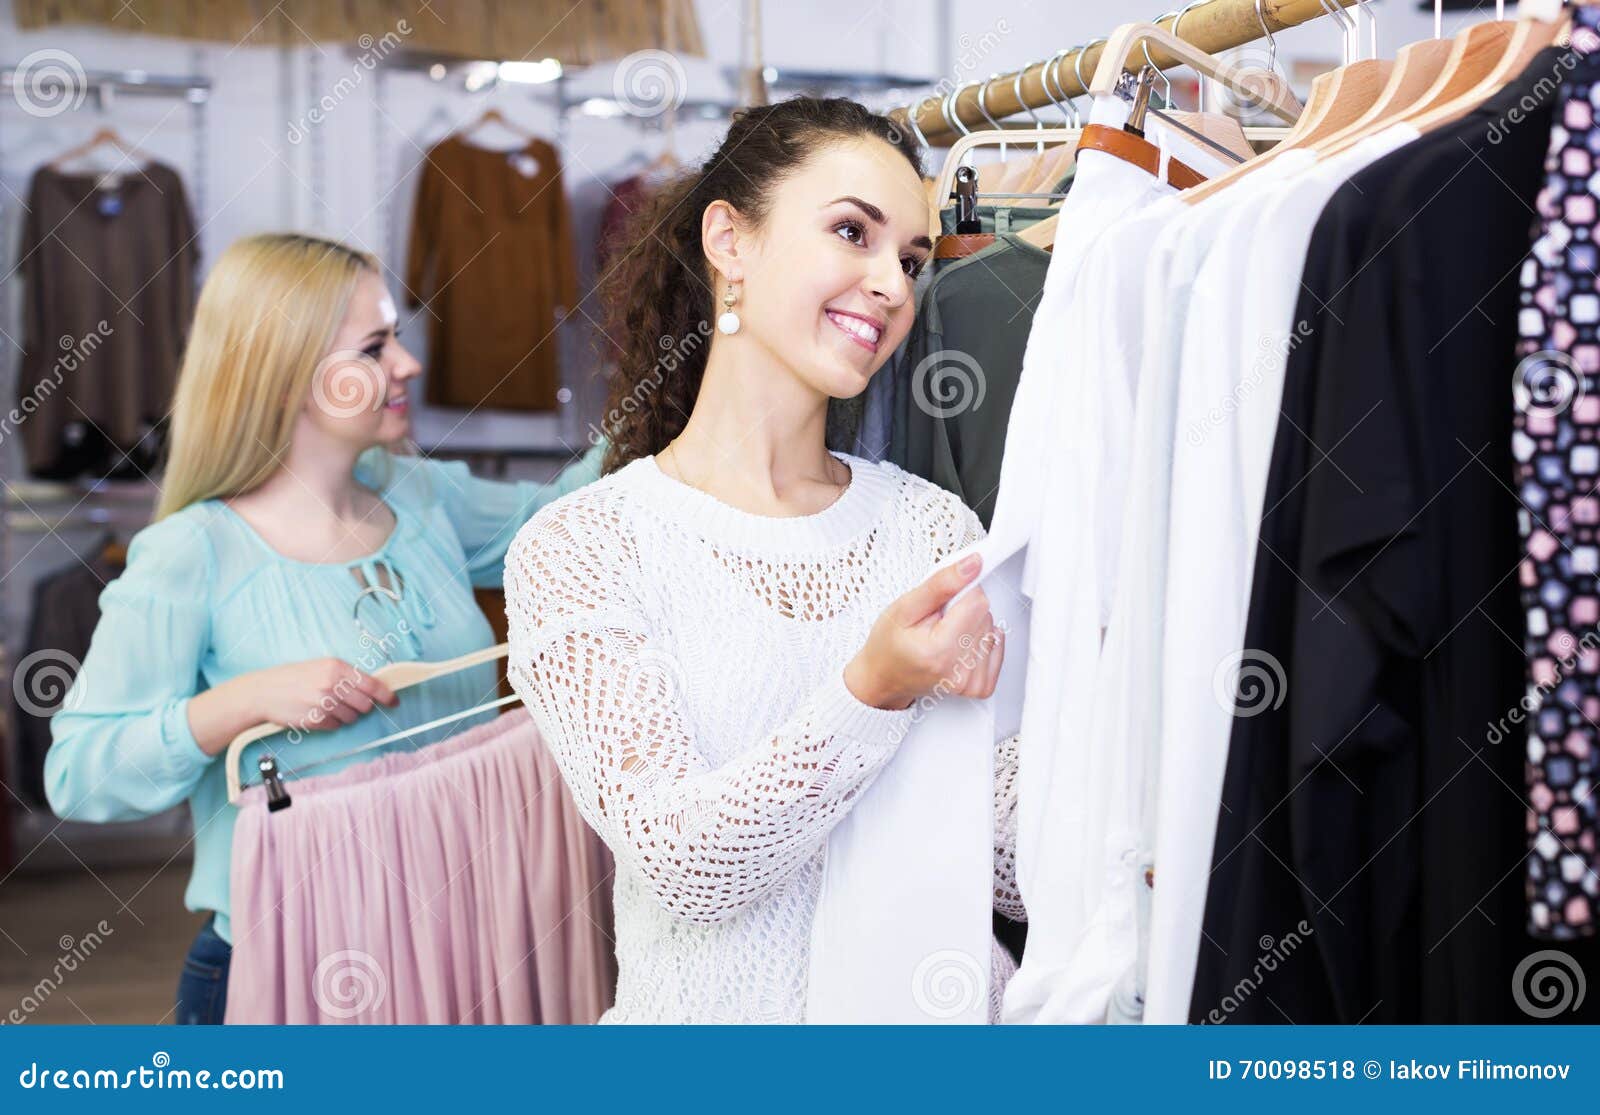 Two girls choosing clothes stock photo. Image of outfit - 70098518